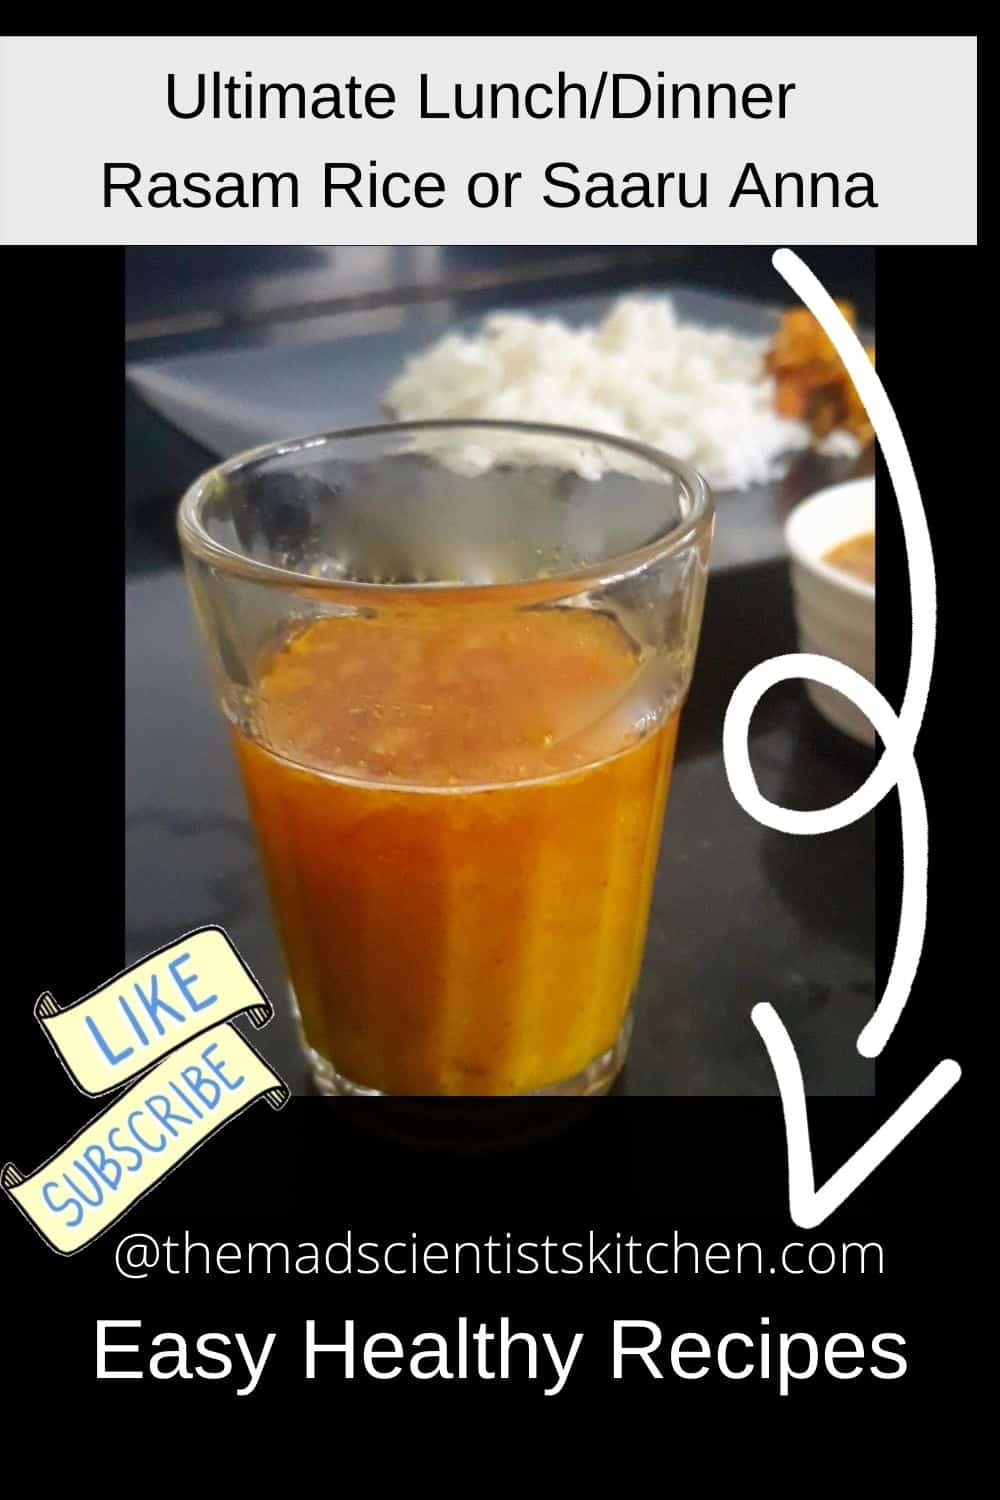 A glass of Rasam, the comfort food.